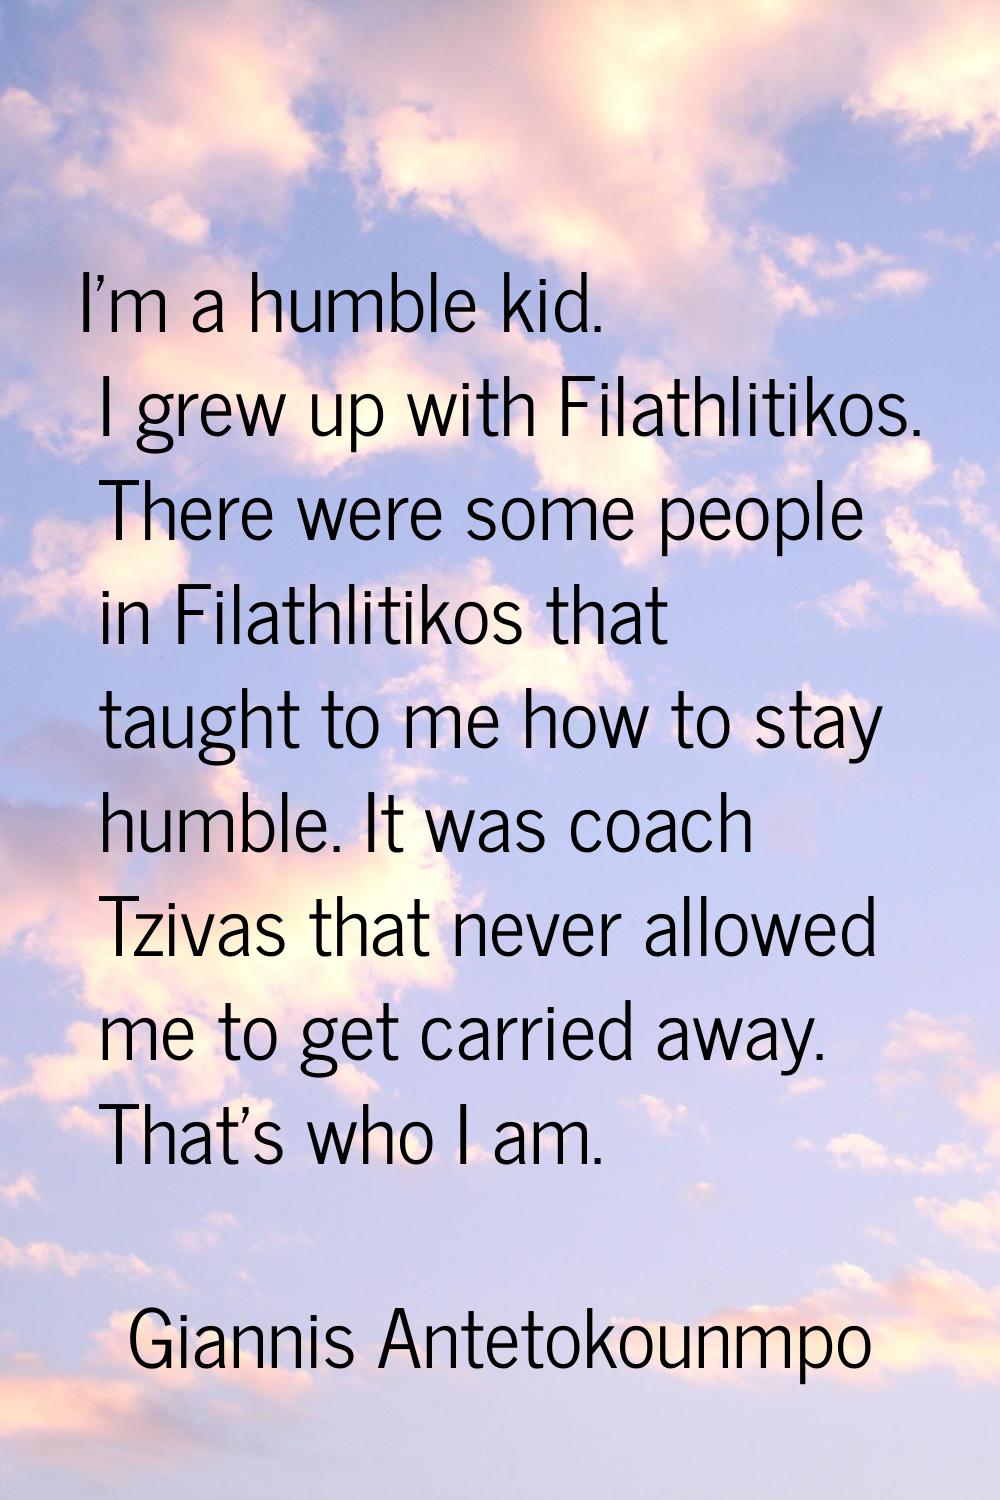 I'm a humble kid. I grew up with Filathlitikos. There were some people in Filathlitikos that taught